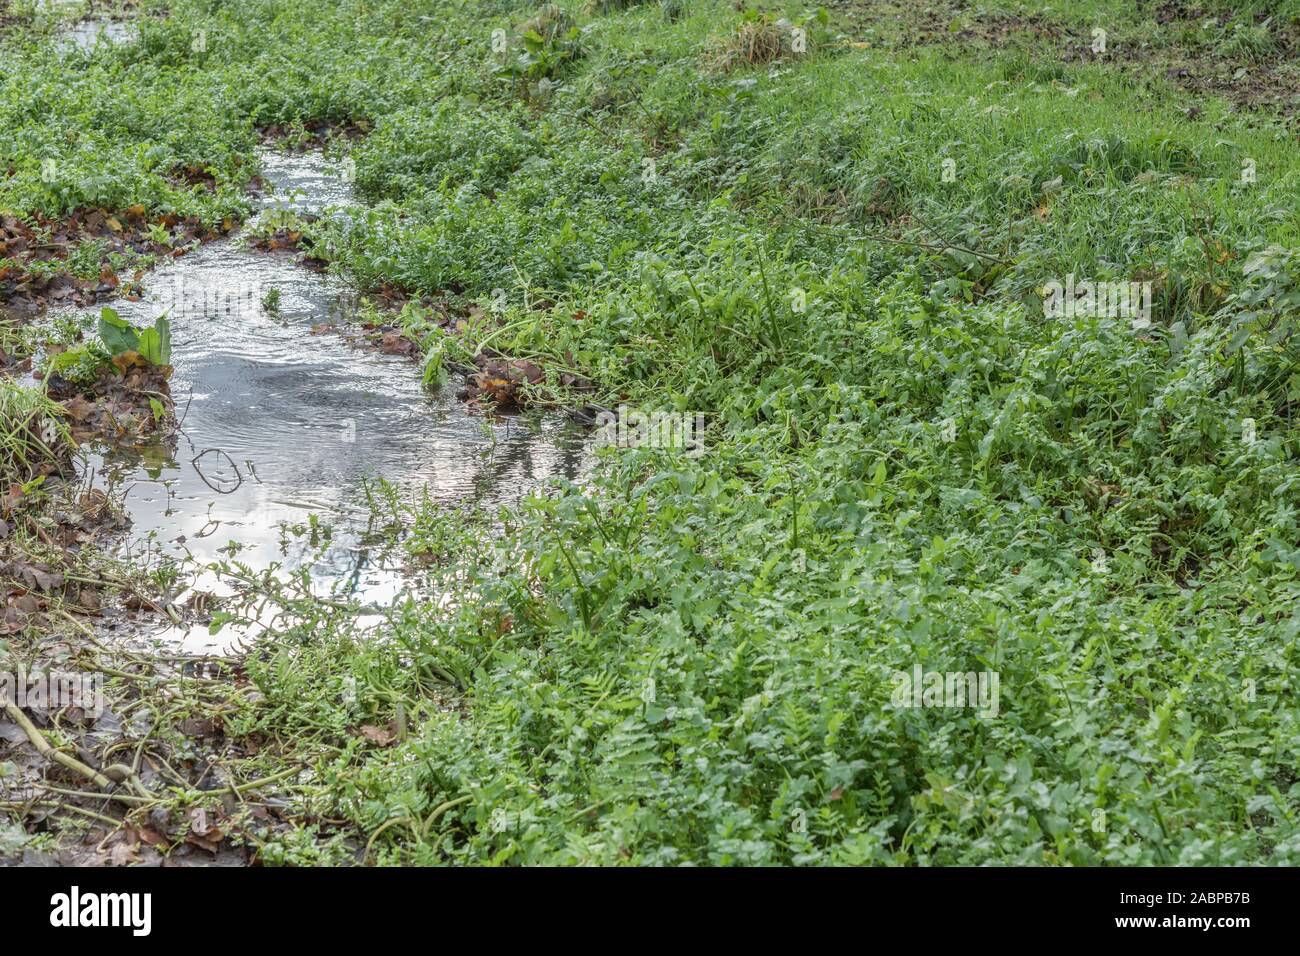 Flooded field drainage ditch full of aquatic hygrophilous plants. Metaphor winter floods, clogged, blockage, groundwater management. Stock Photo